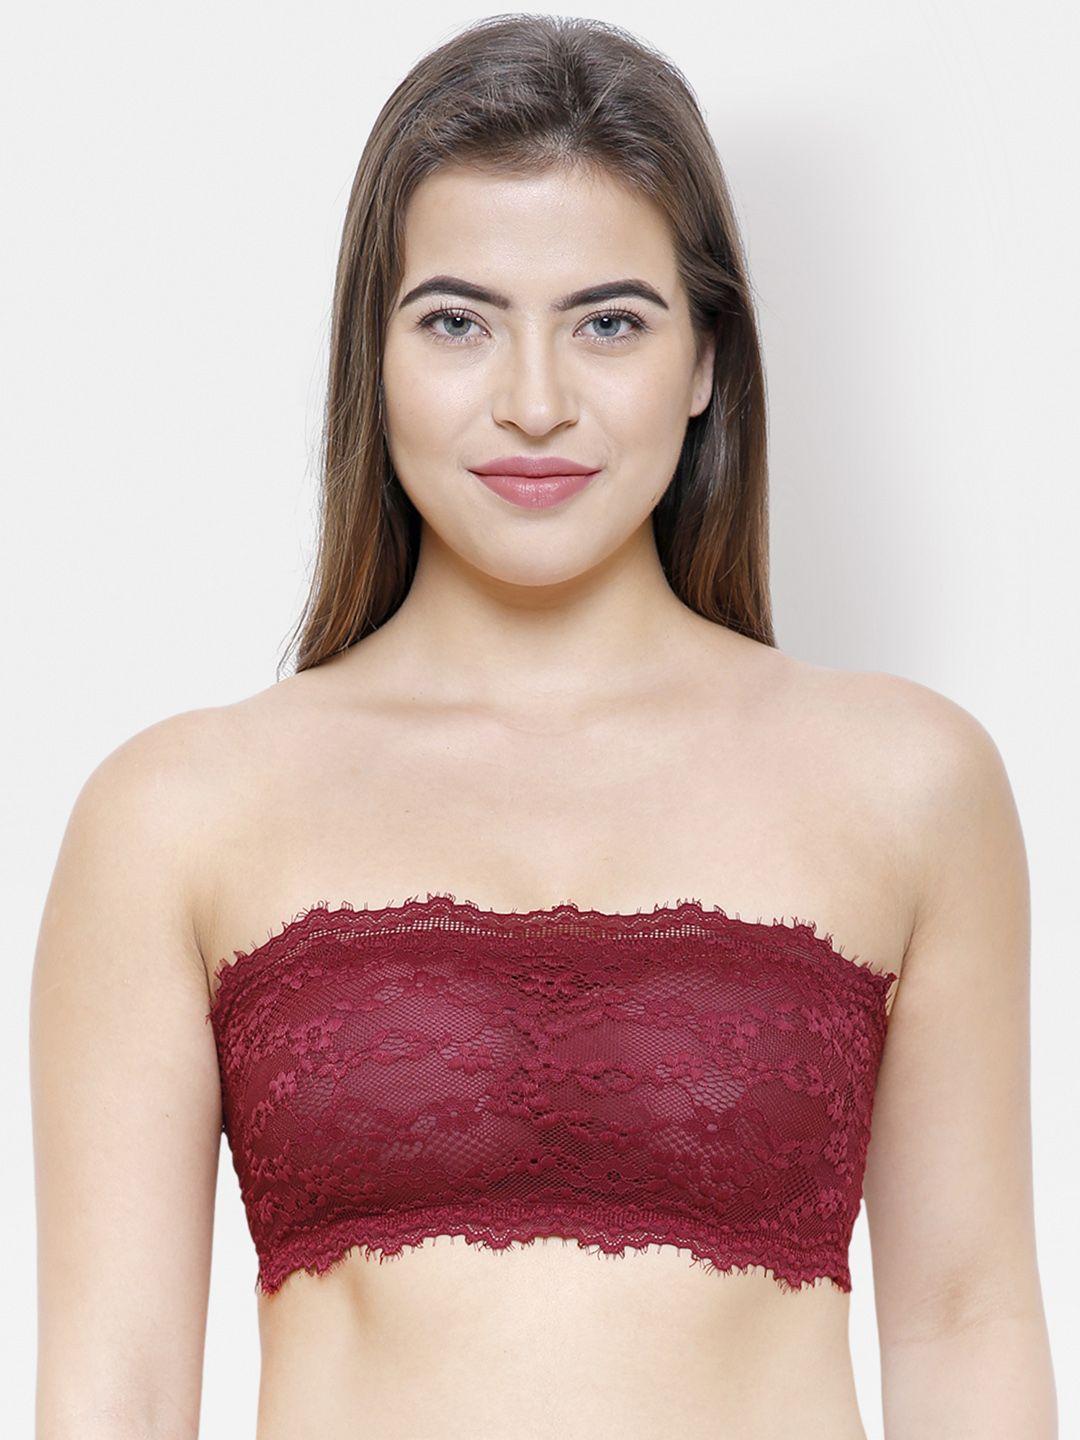 fashionrack maroon lace non-wired lightly padded bandeau bra 8043